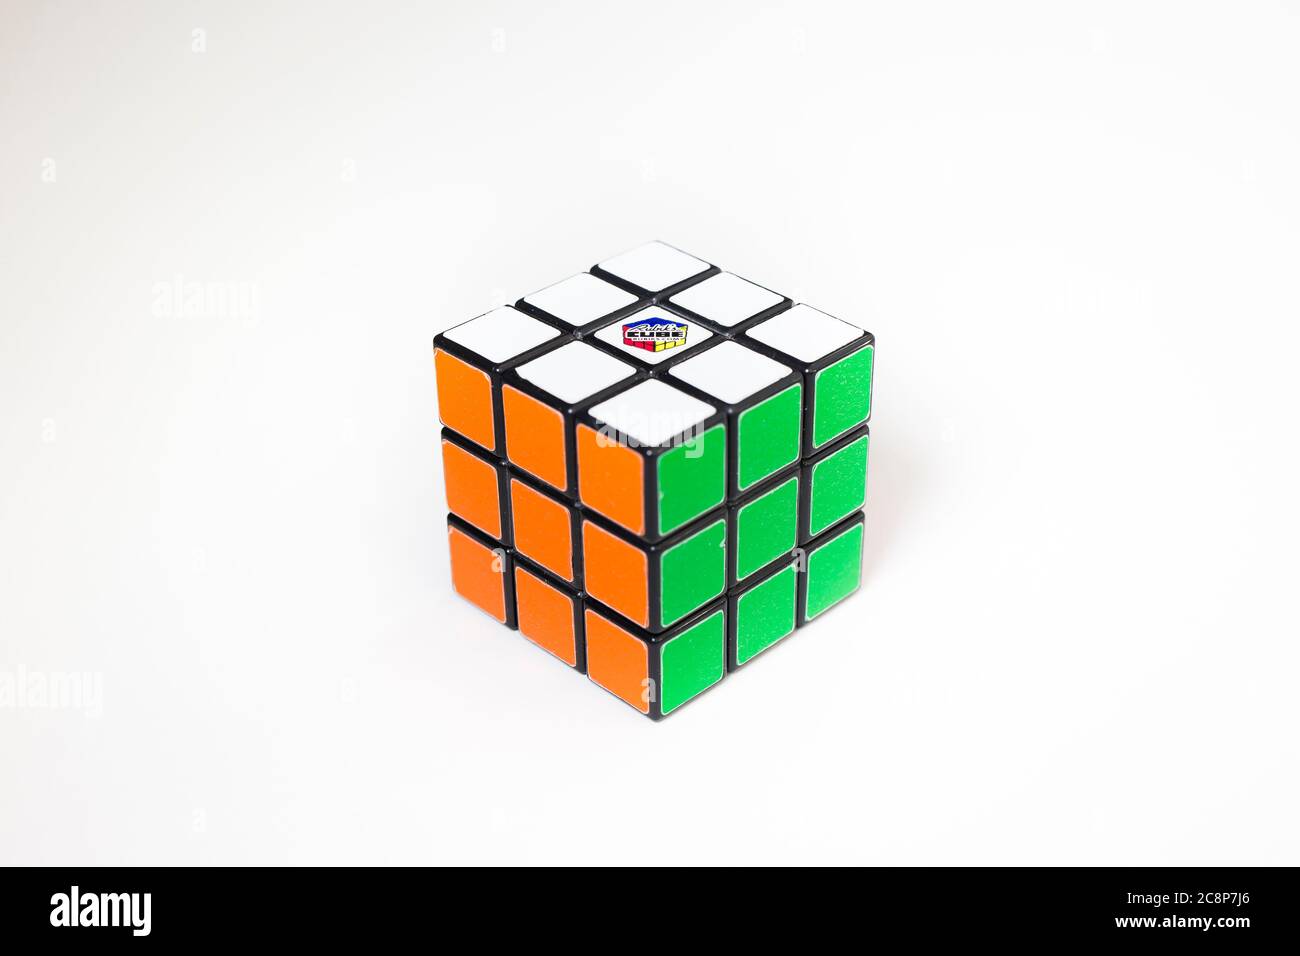 Close up of a Rubik's Cube, the famous brainteasing 3D combination puzzle, isolated on white background. Brainteaser game, toy. Concept challenge. Stock Photo